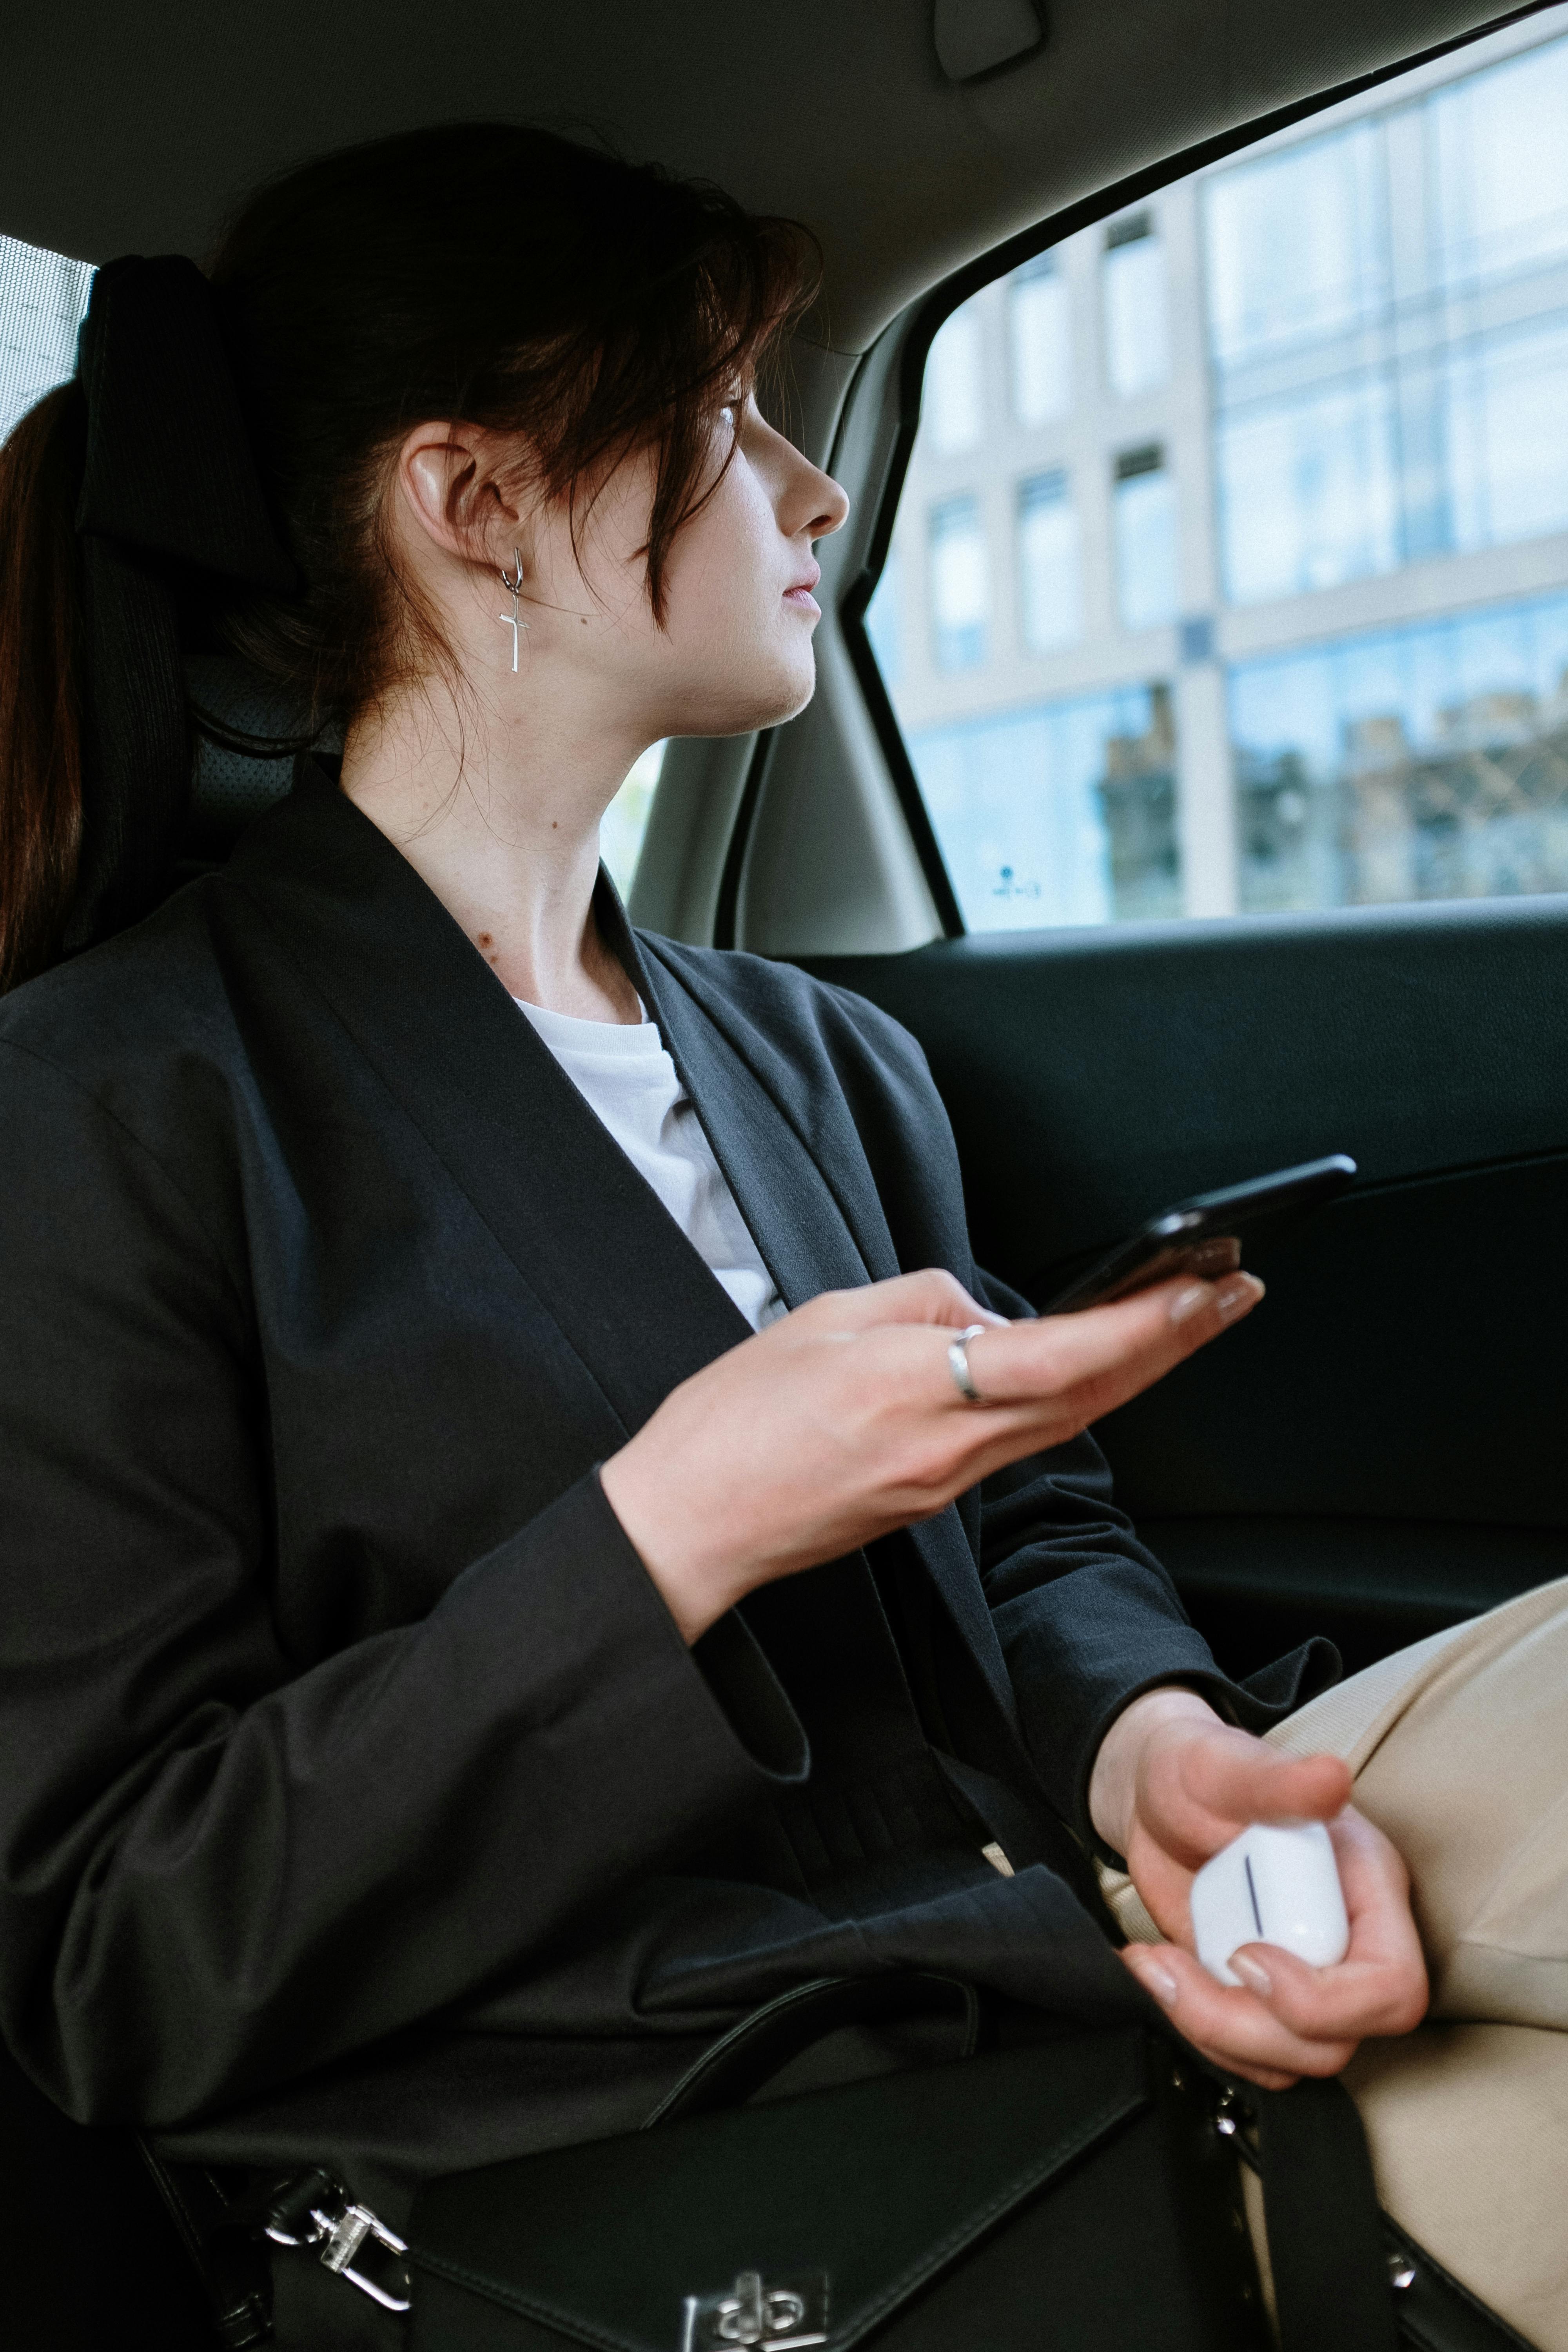 A woman in a car's backseat | Source: Pexels